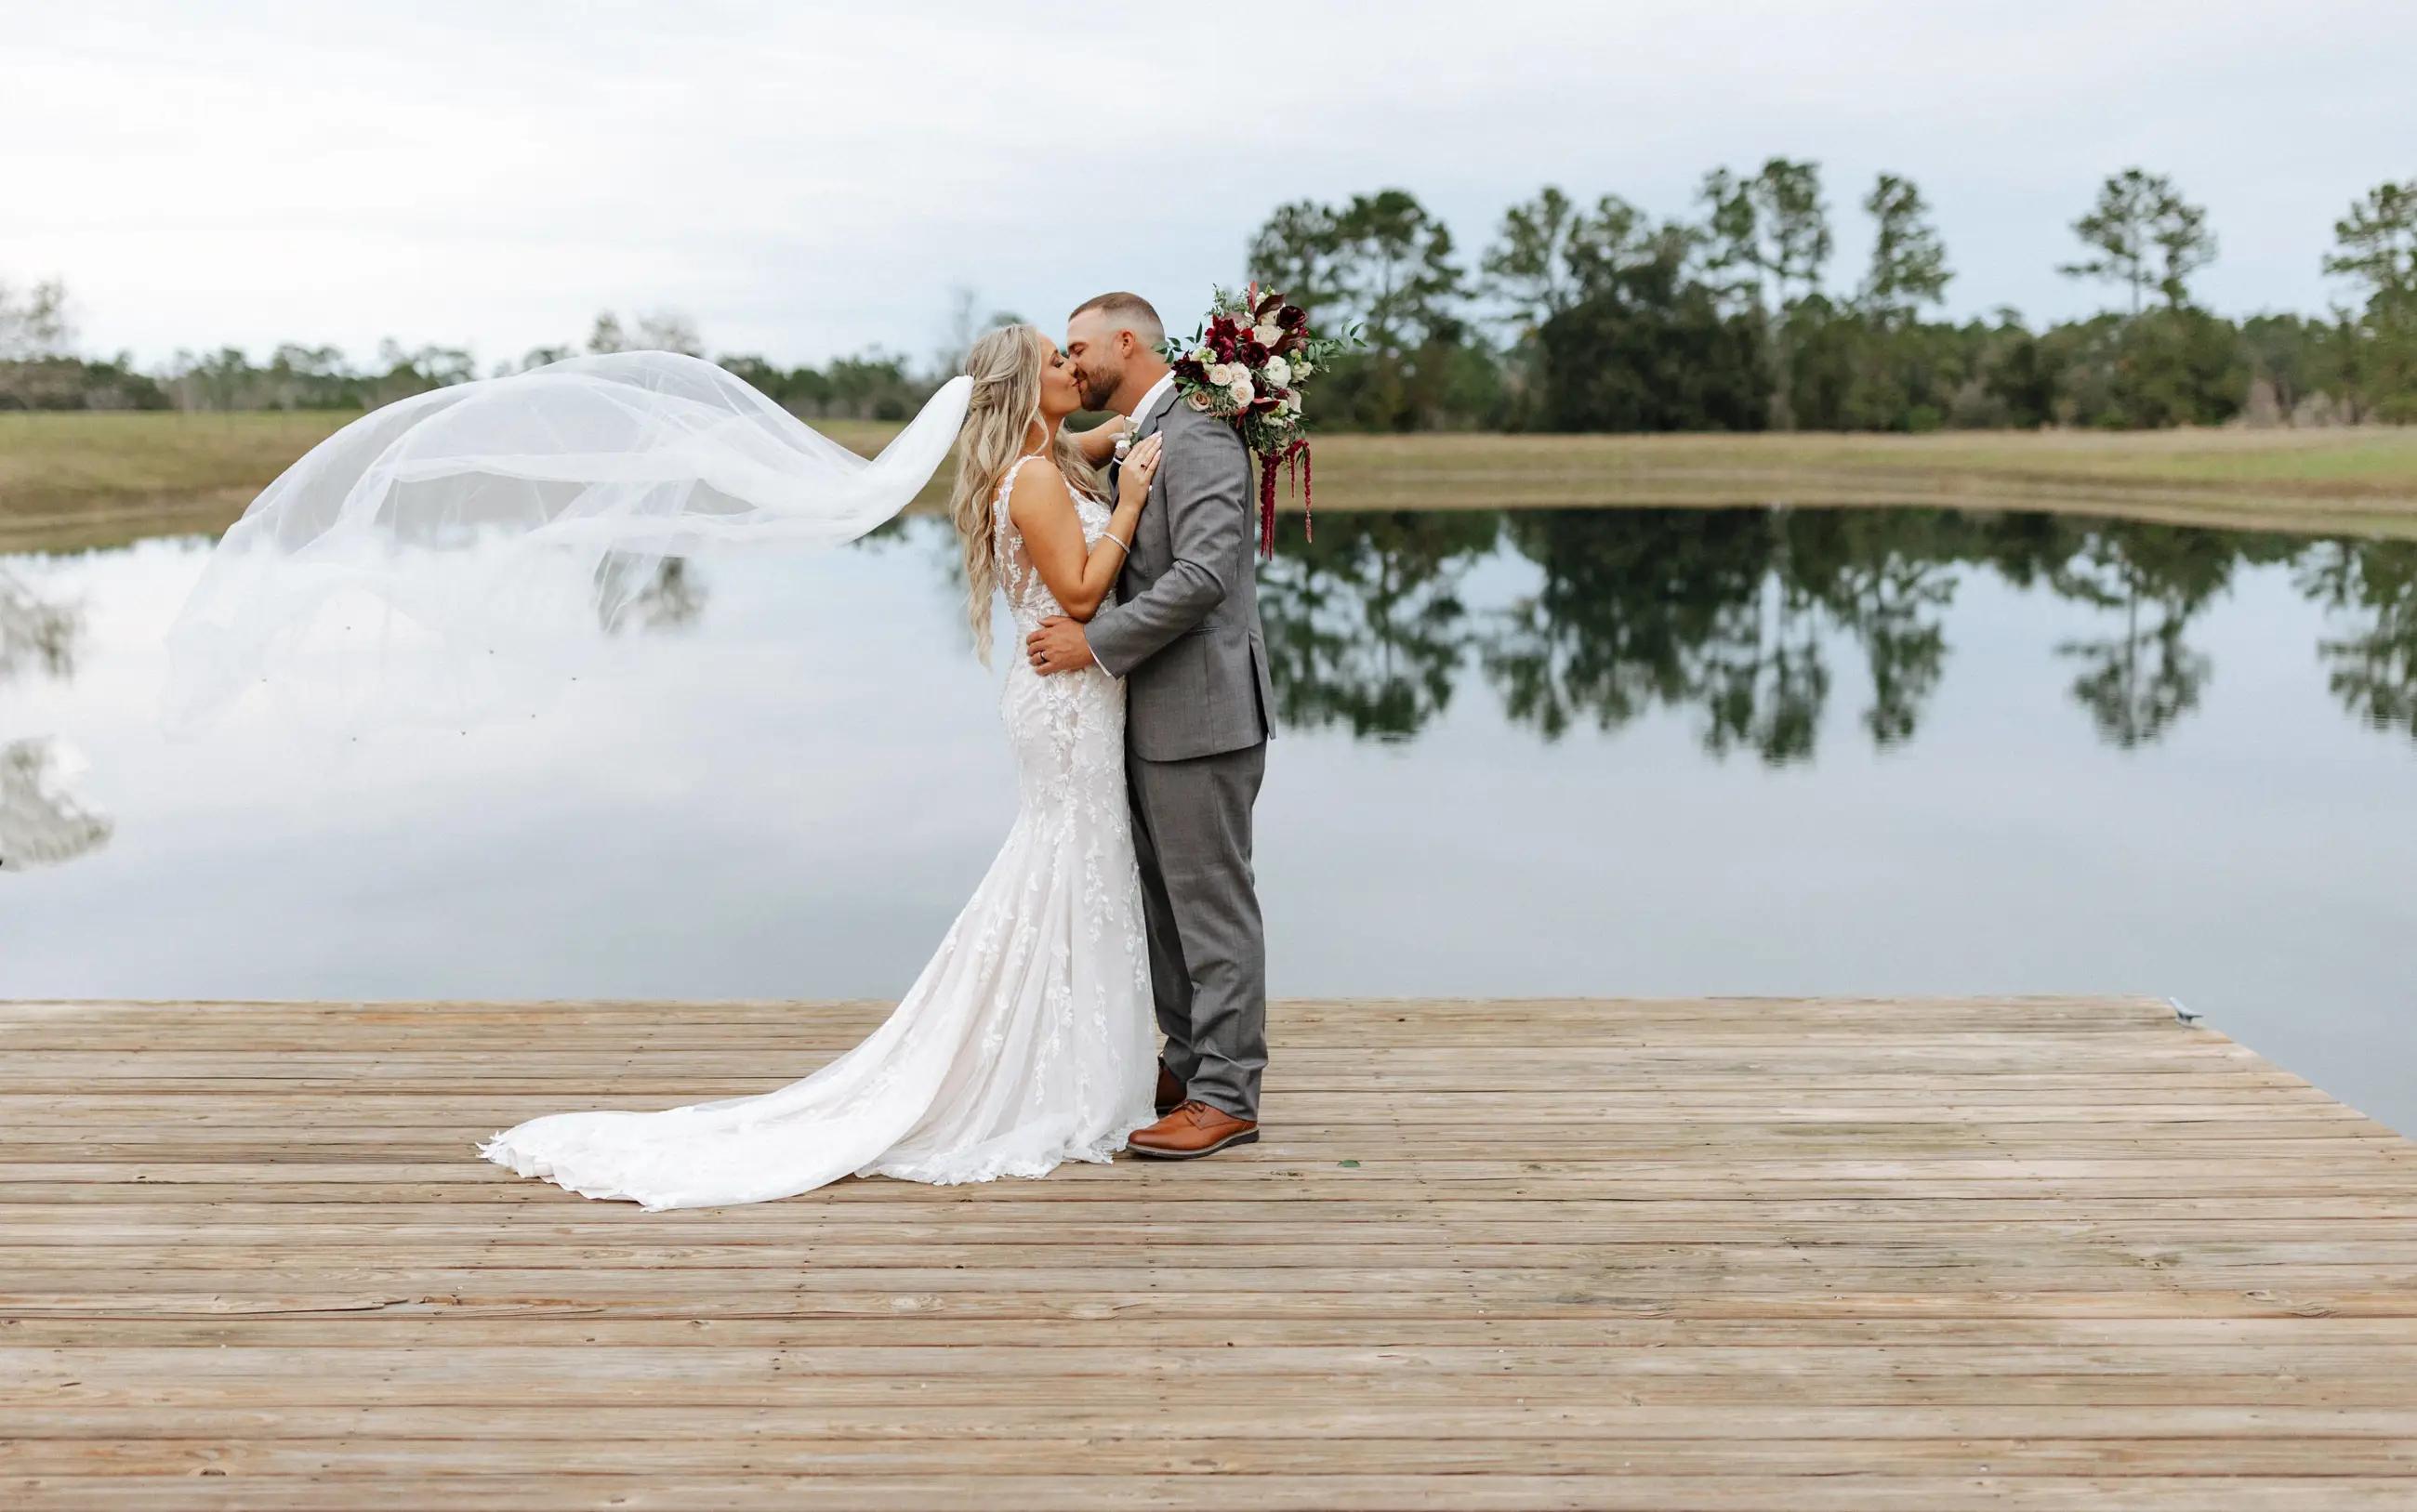 Kelly & Justin Whaley. Mobile Image